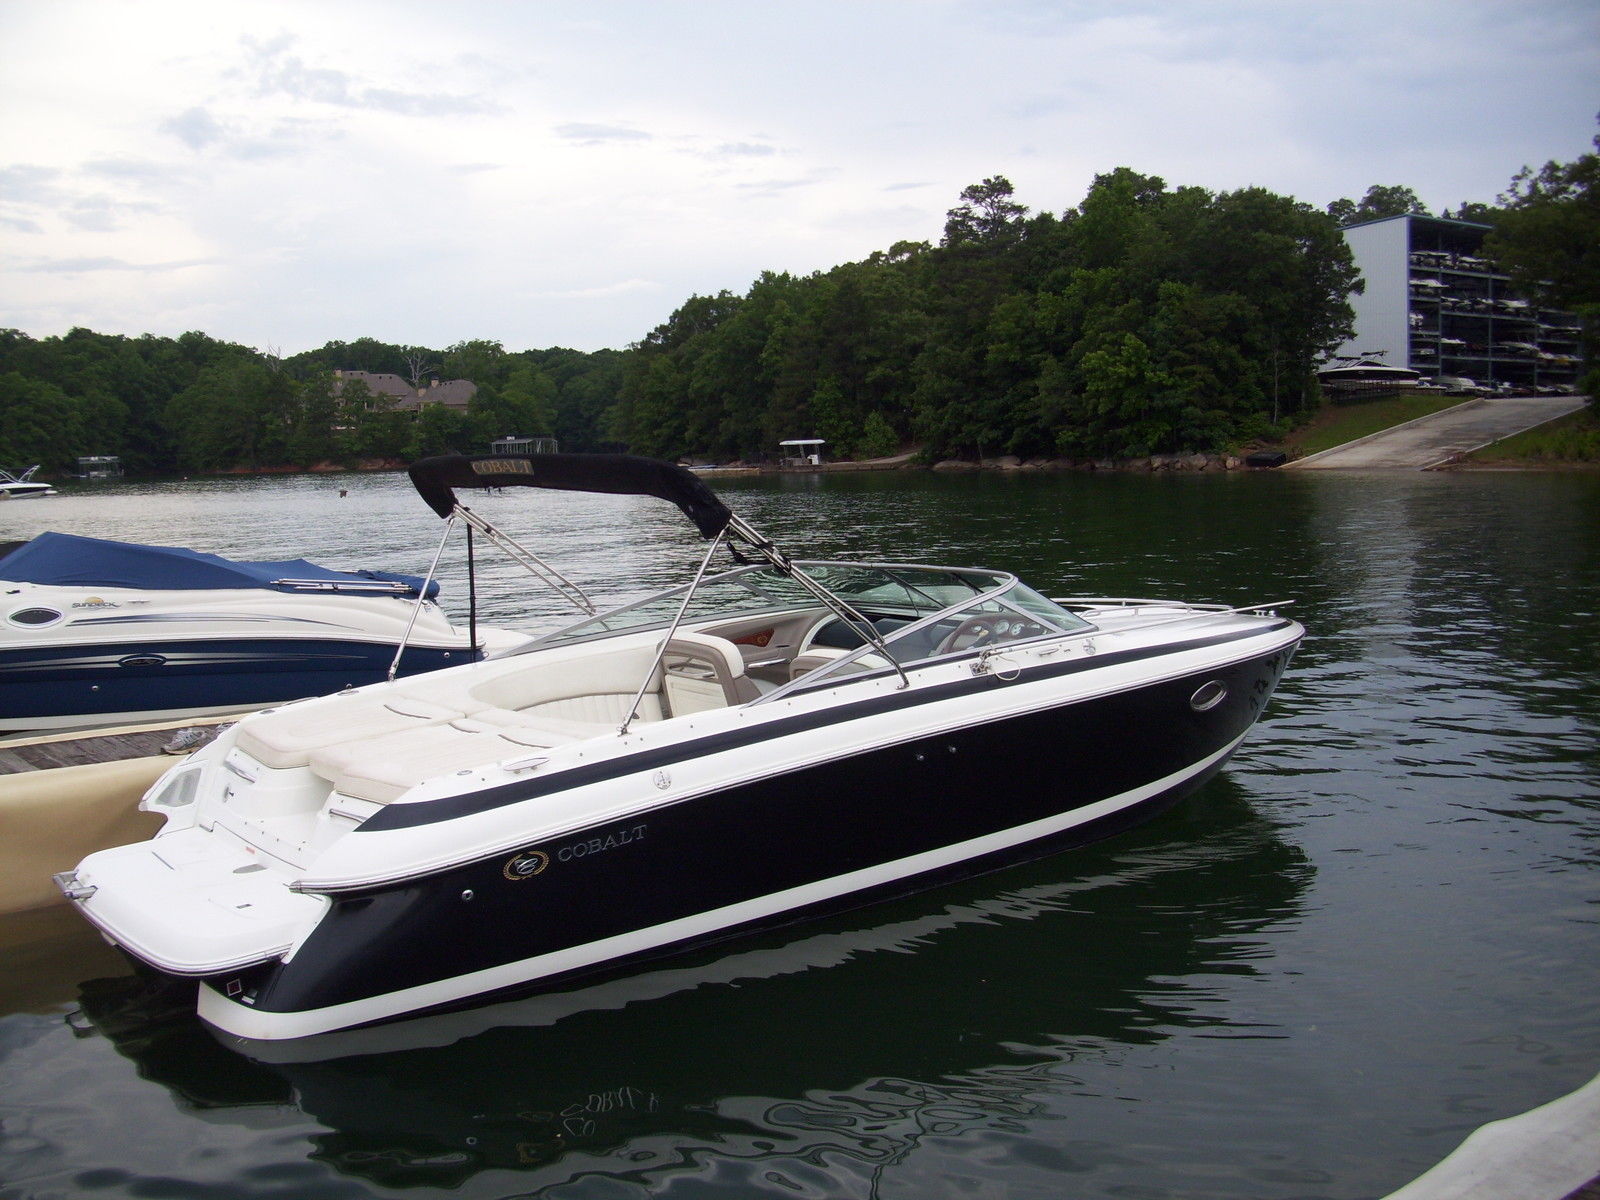 cobalt 263 2002 for sale for ,000 - boats-from-usa.com